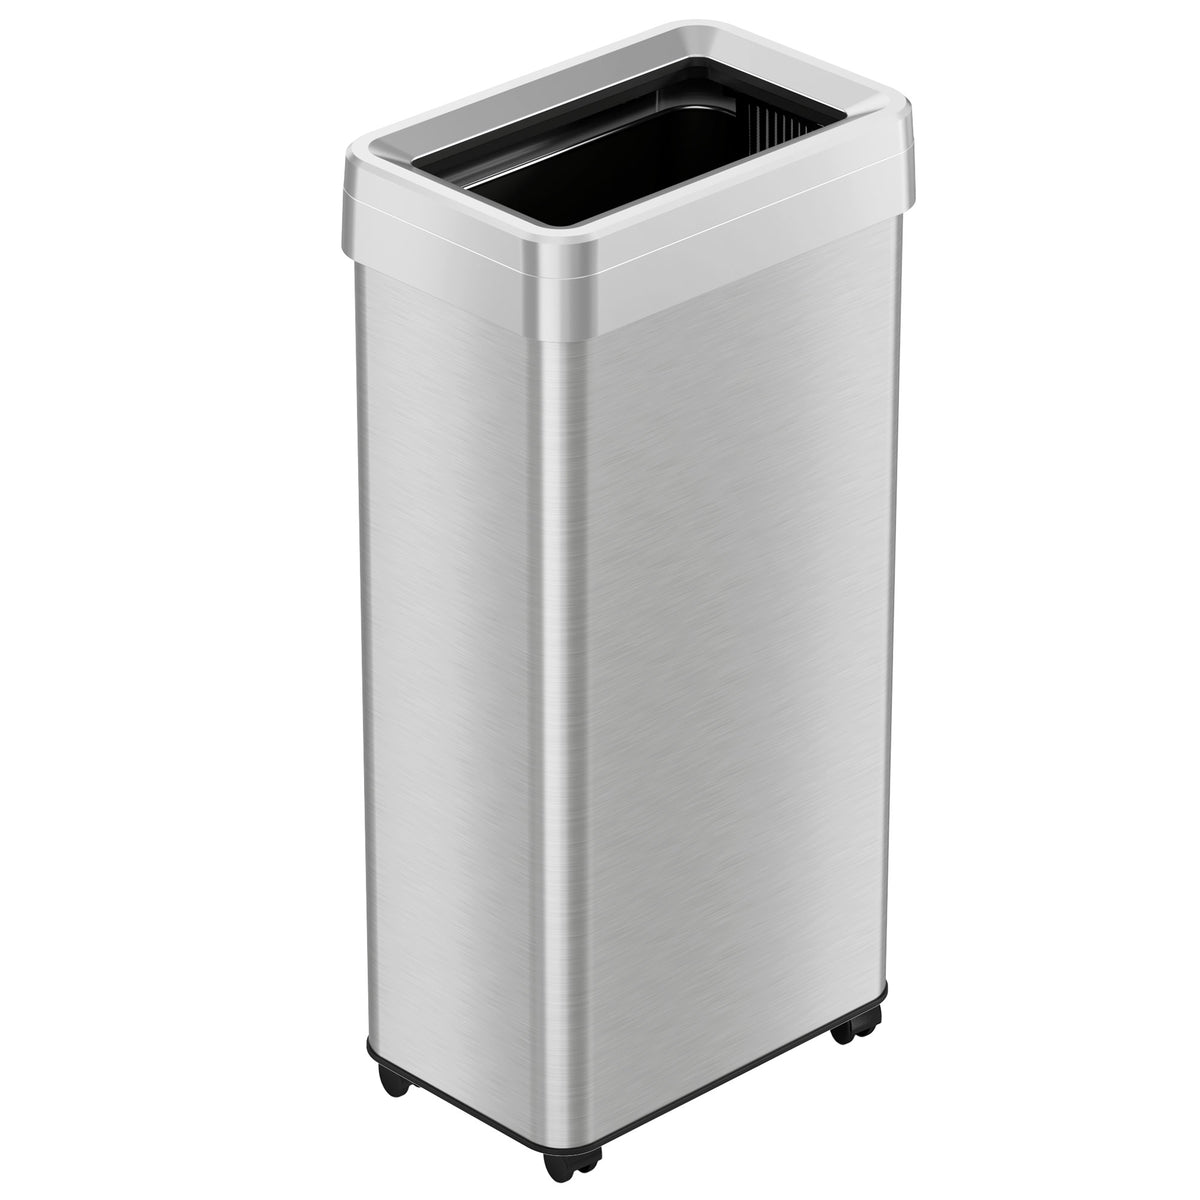 21 Gallon / 80 Liter Rectangular Open Top Trash Can with Wheels